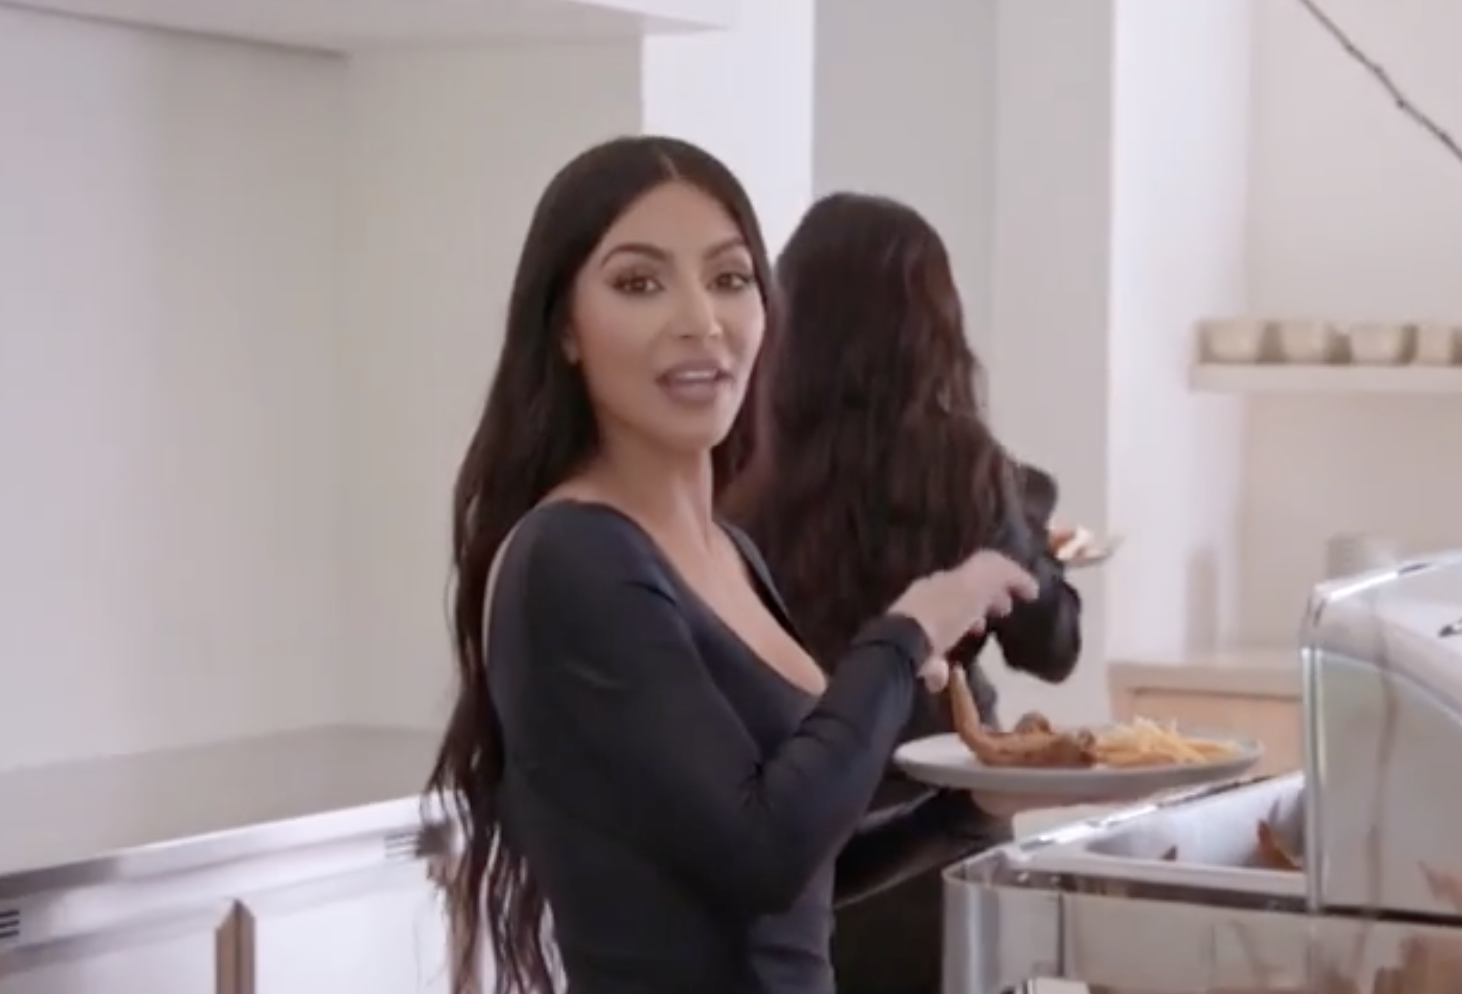 Kim speaks to the camera in this still from the promotional video